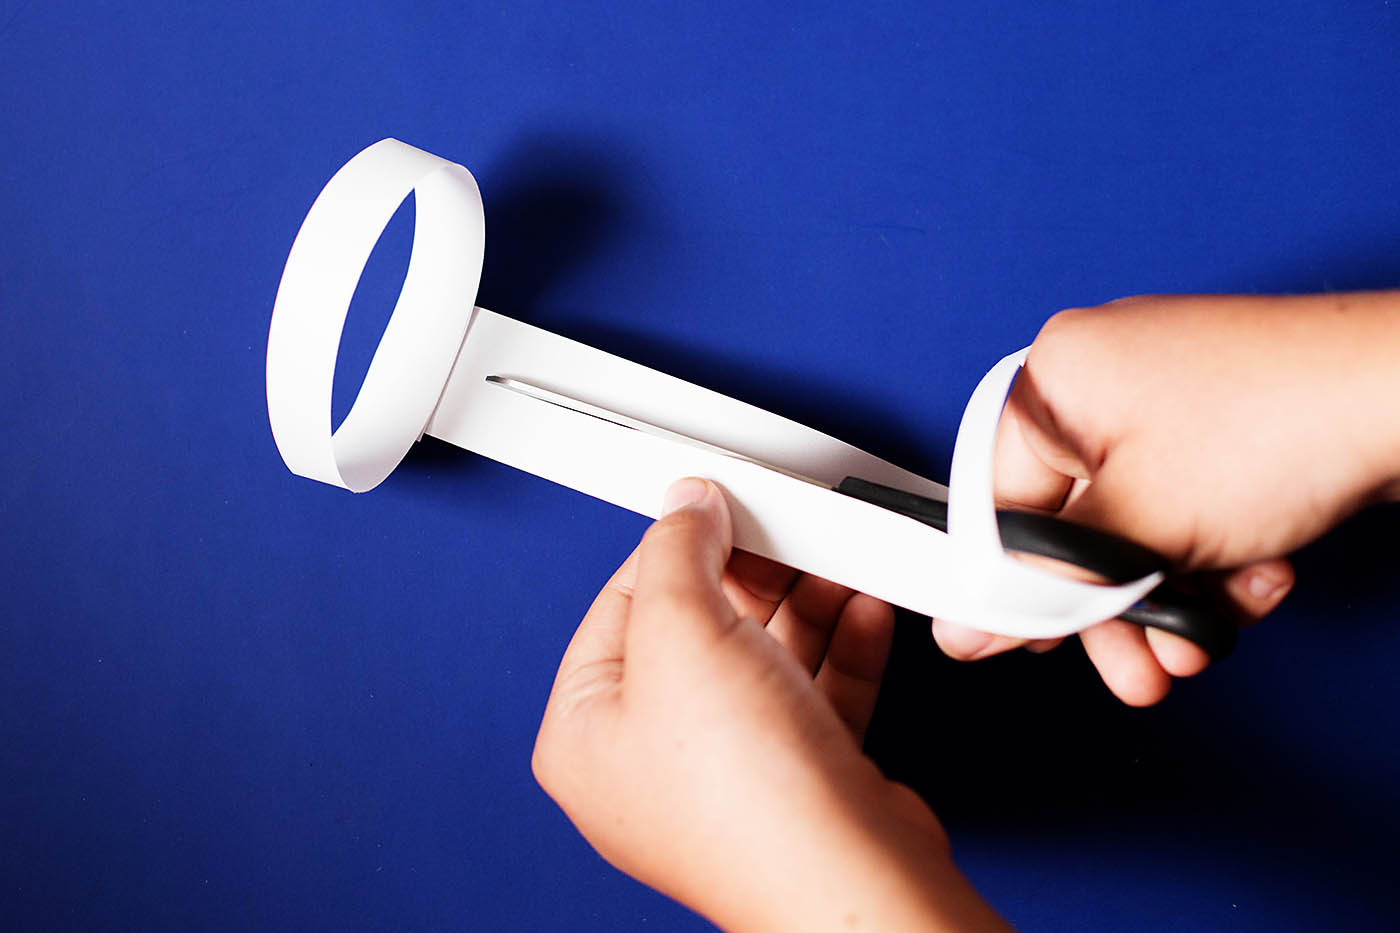 Paper rings to rectangle trick to teach kids